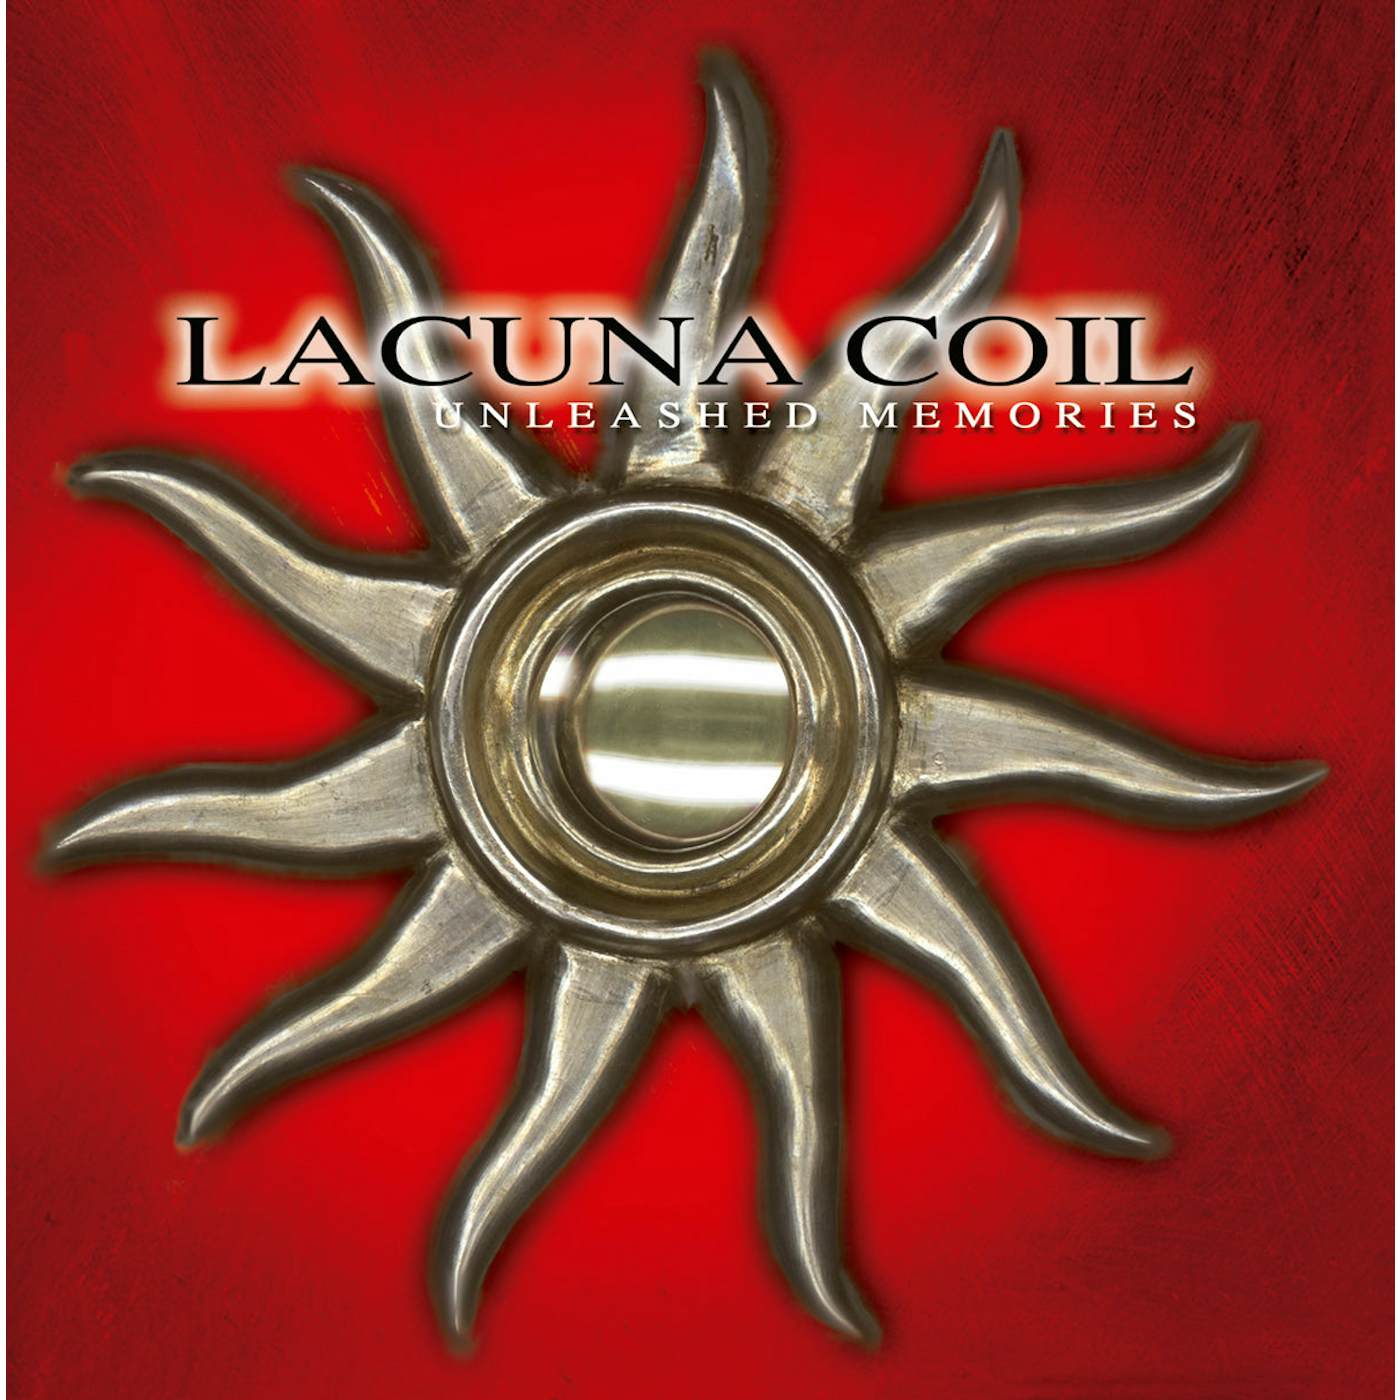 Lacuna Coil "Unleashed Memories (Red)" 12"